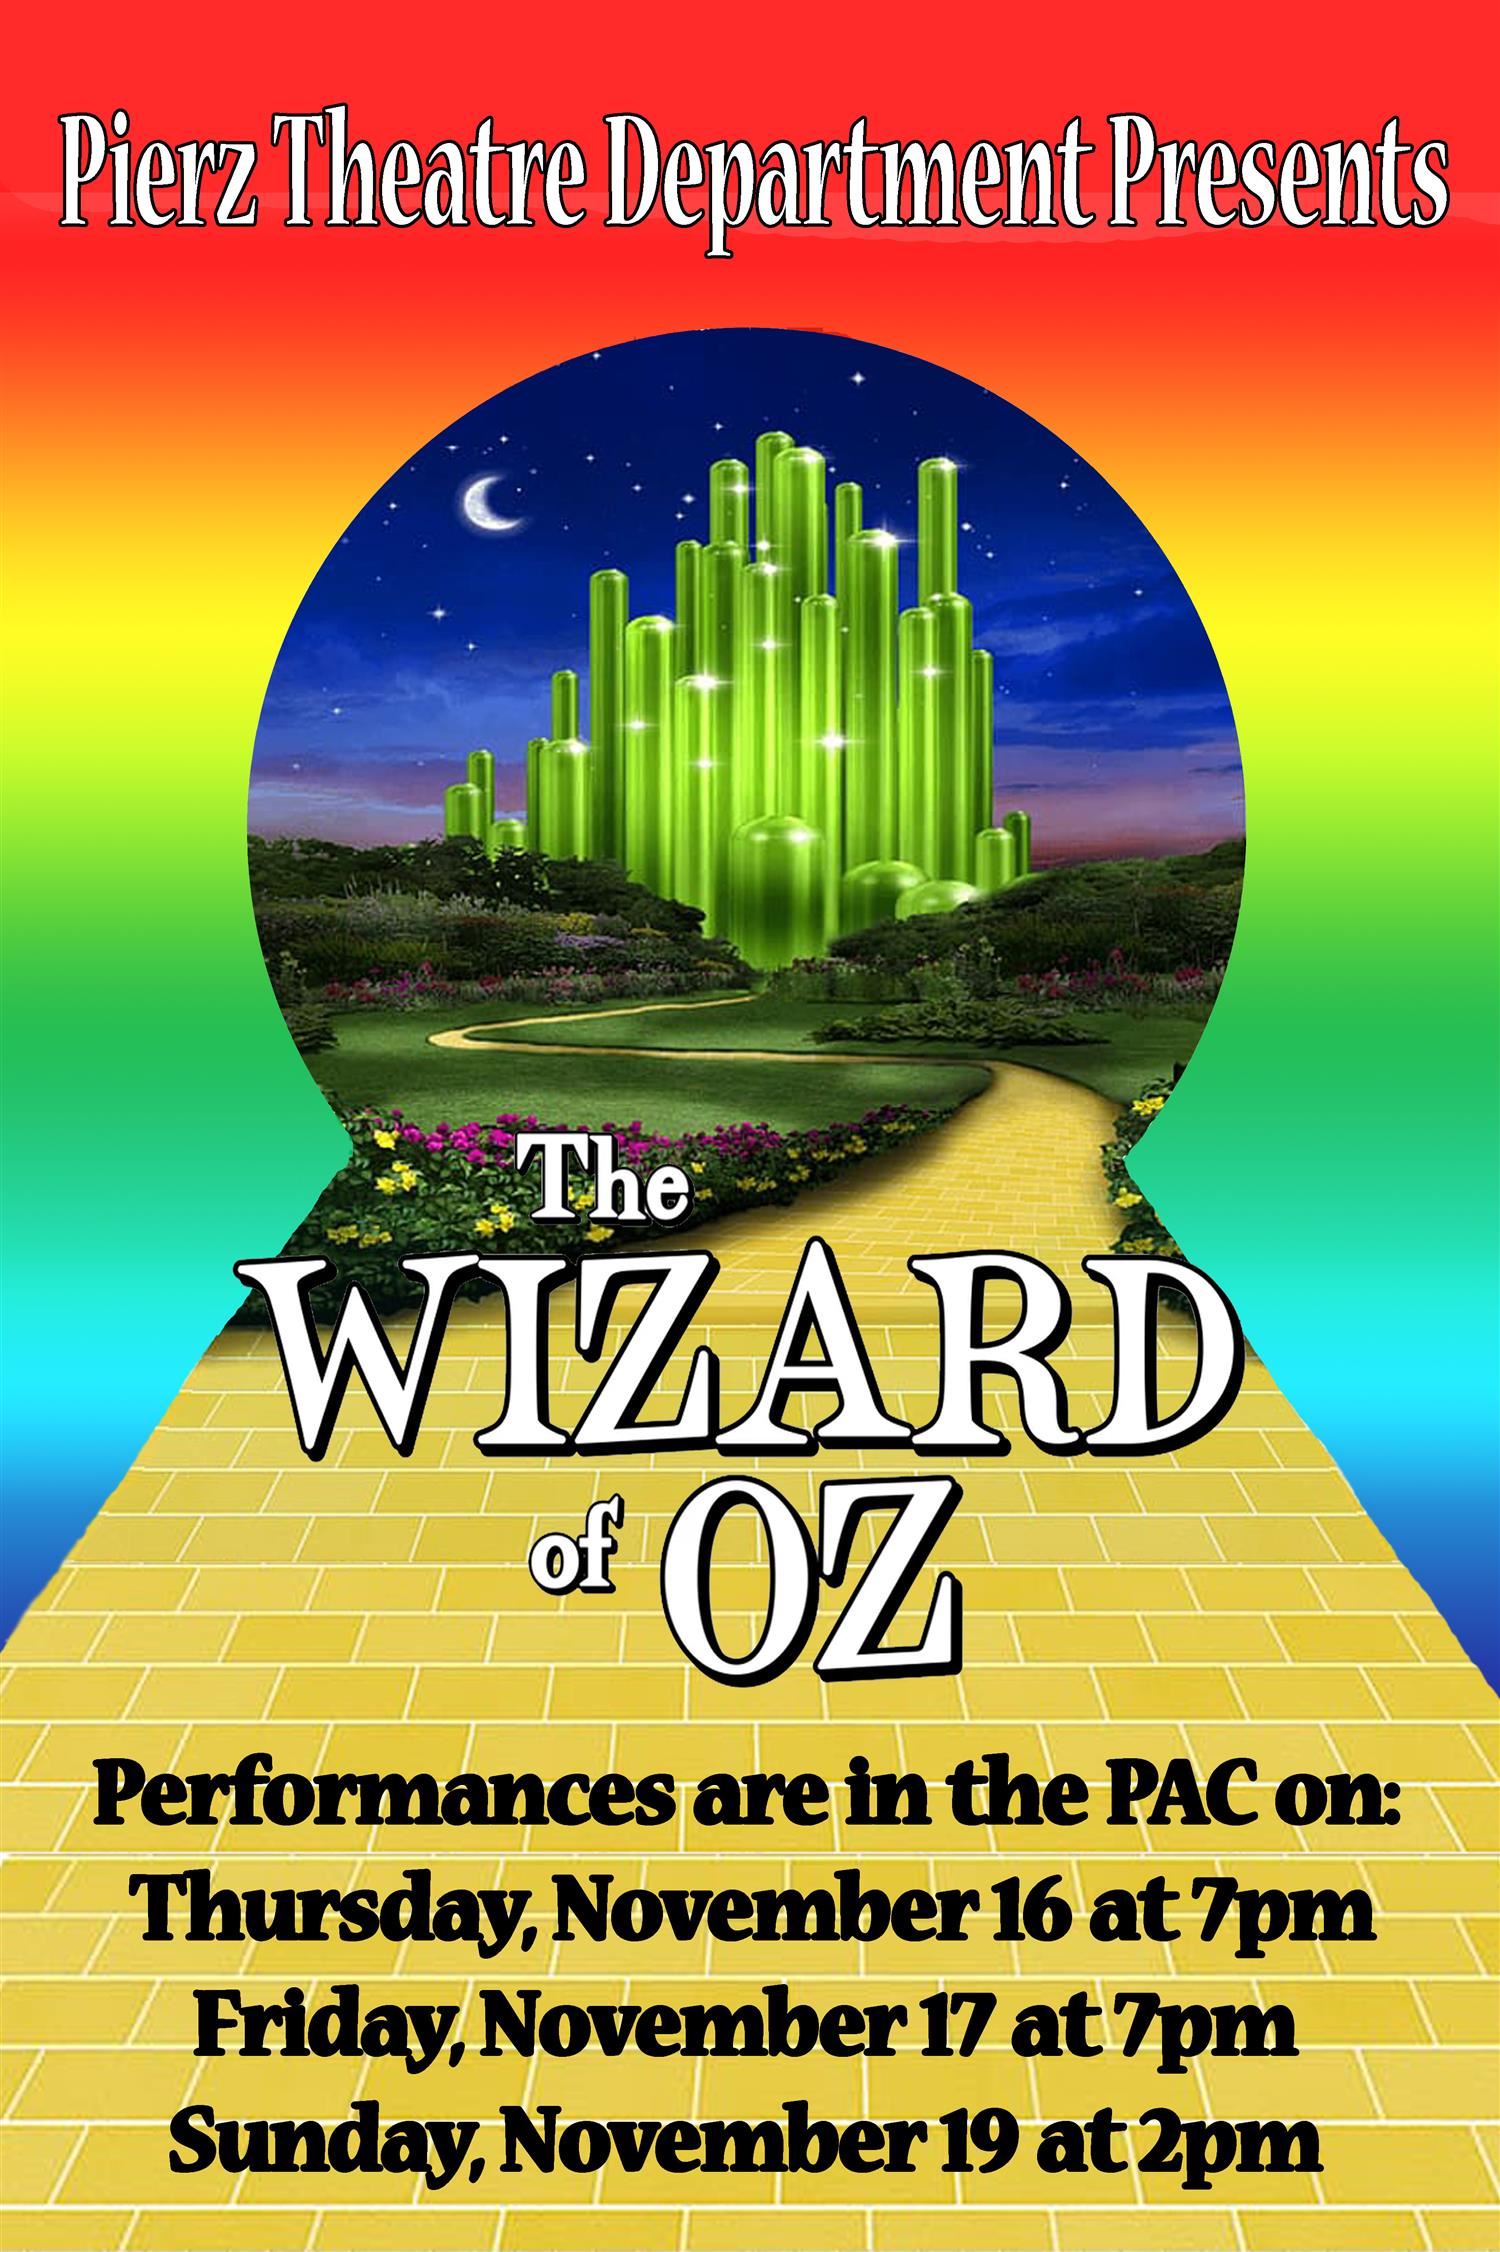 Wizard of Oz play coming to the PAC